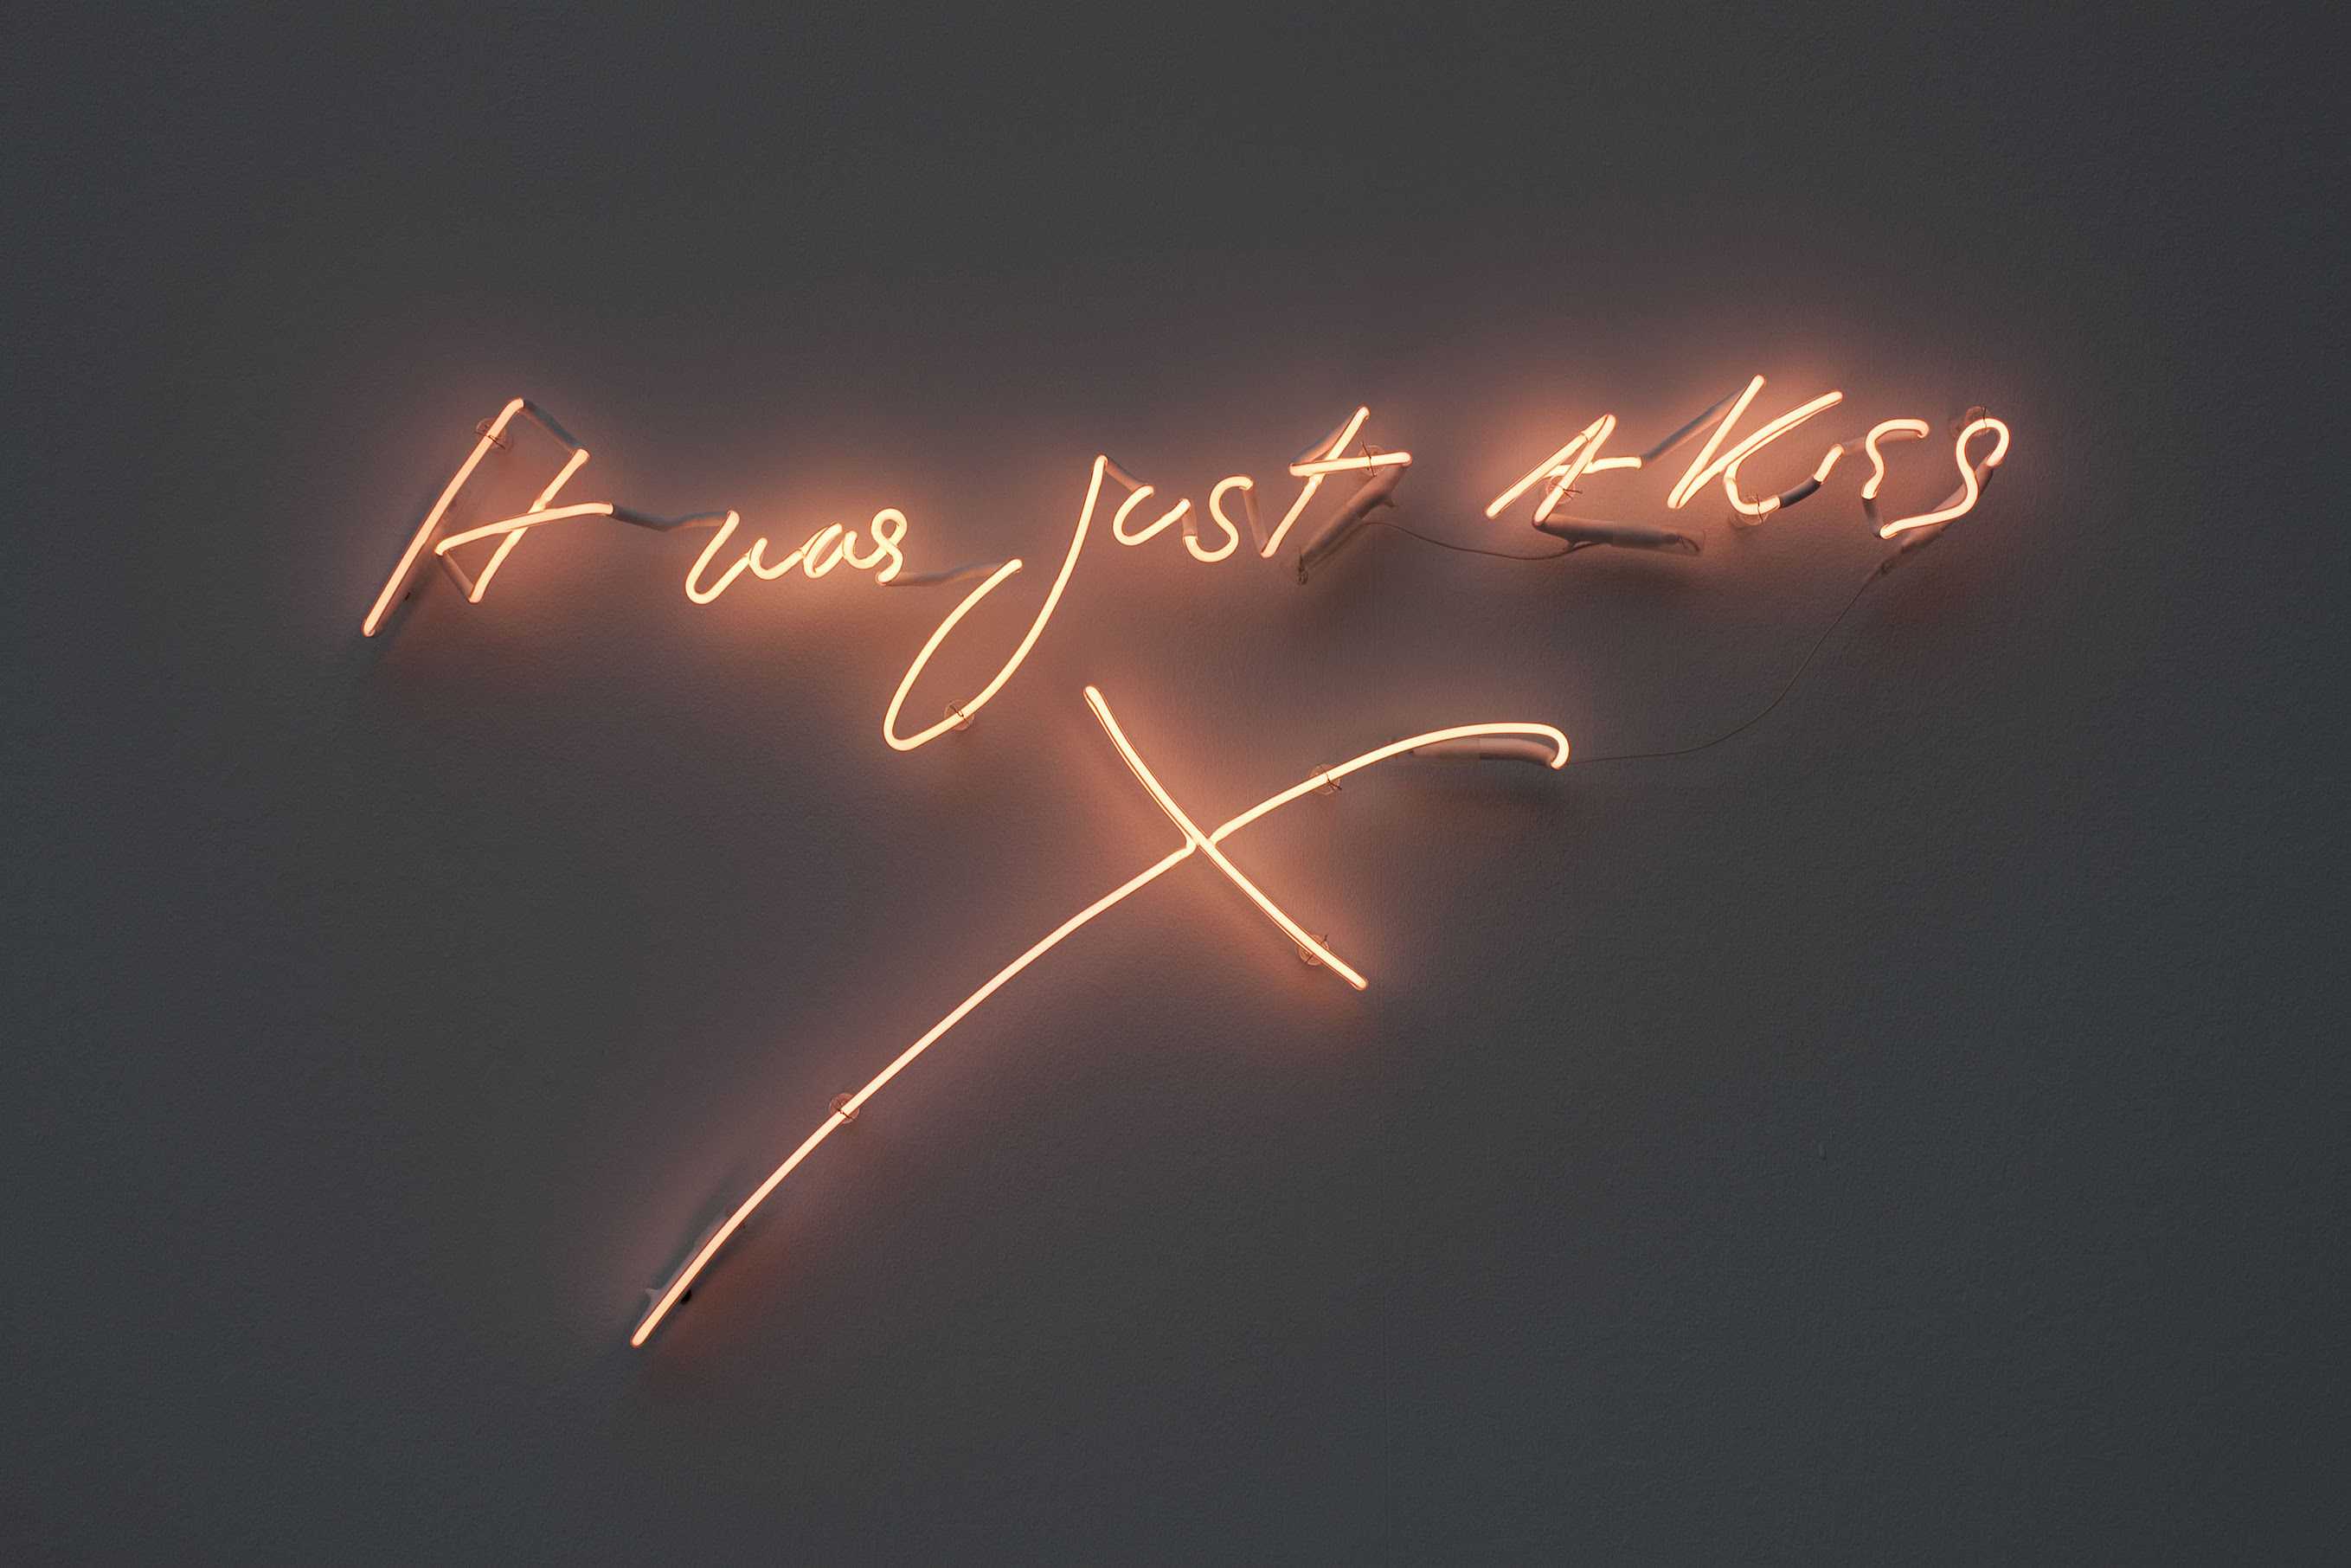 Tracey Emin It was just a kiss, 2010 (photography of original 2010 work); Private collection © Tracey Emin. All rights reserved, DACS 2019 